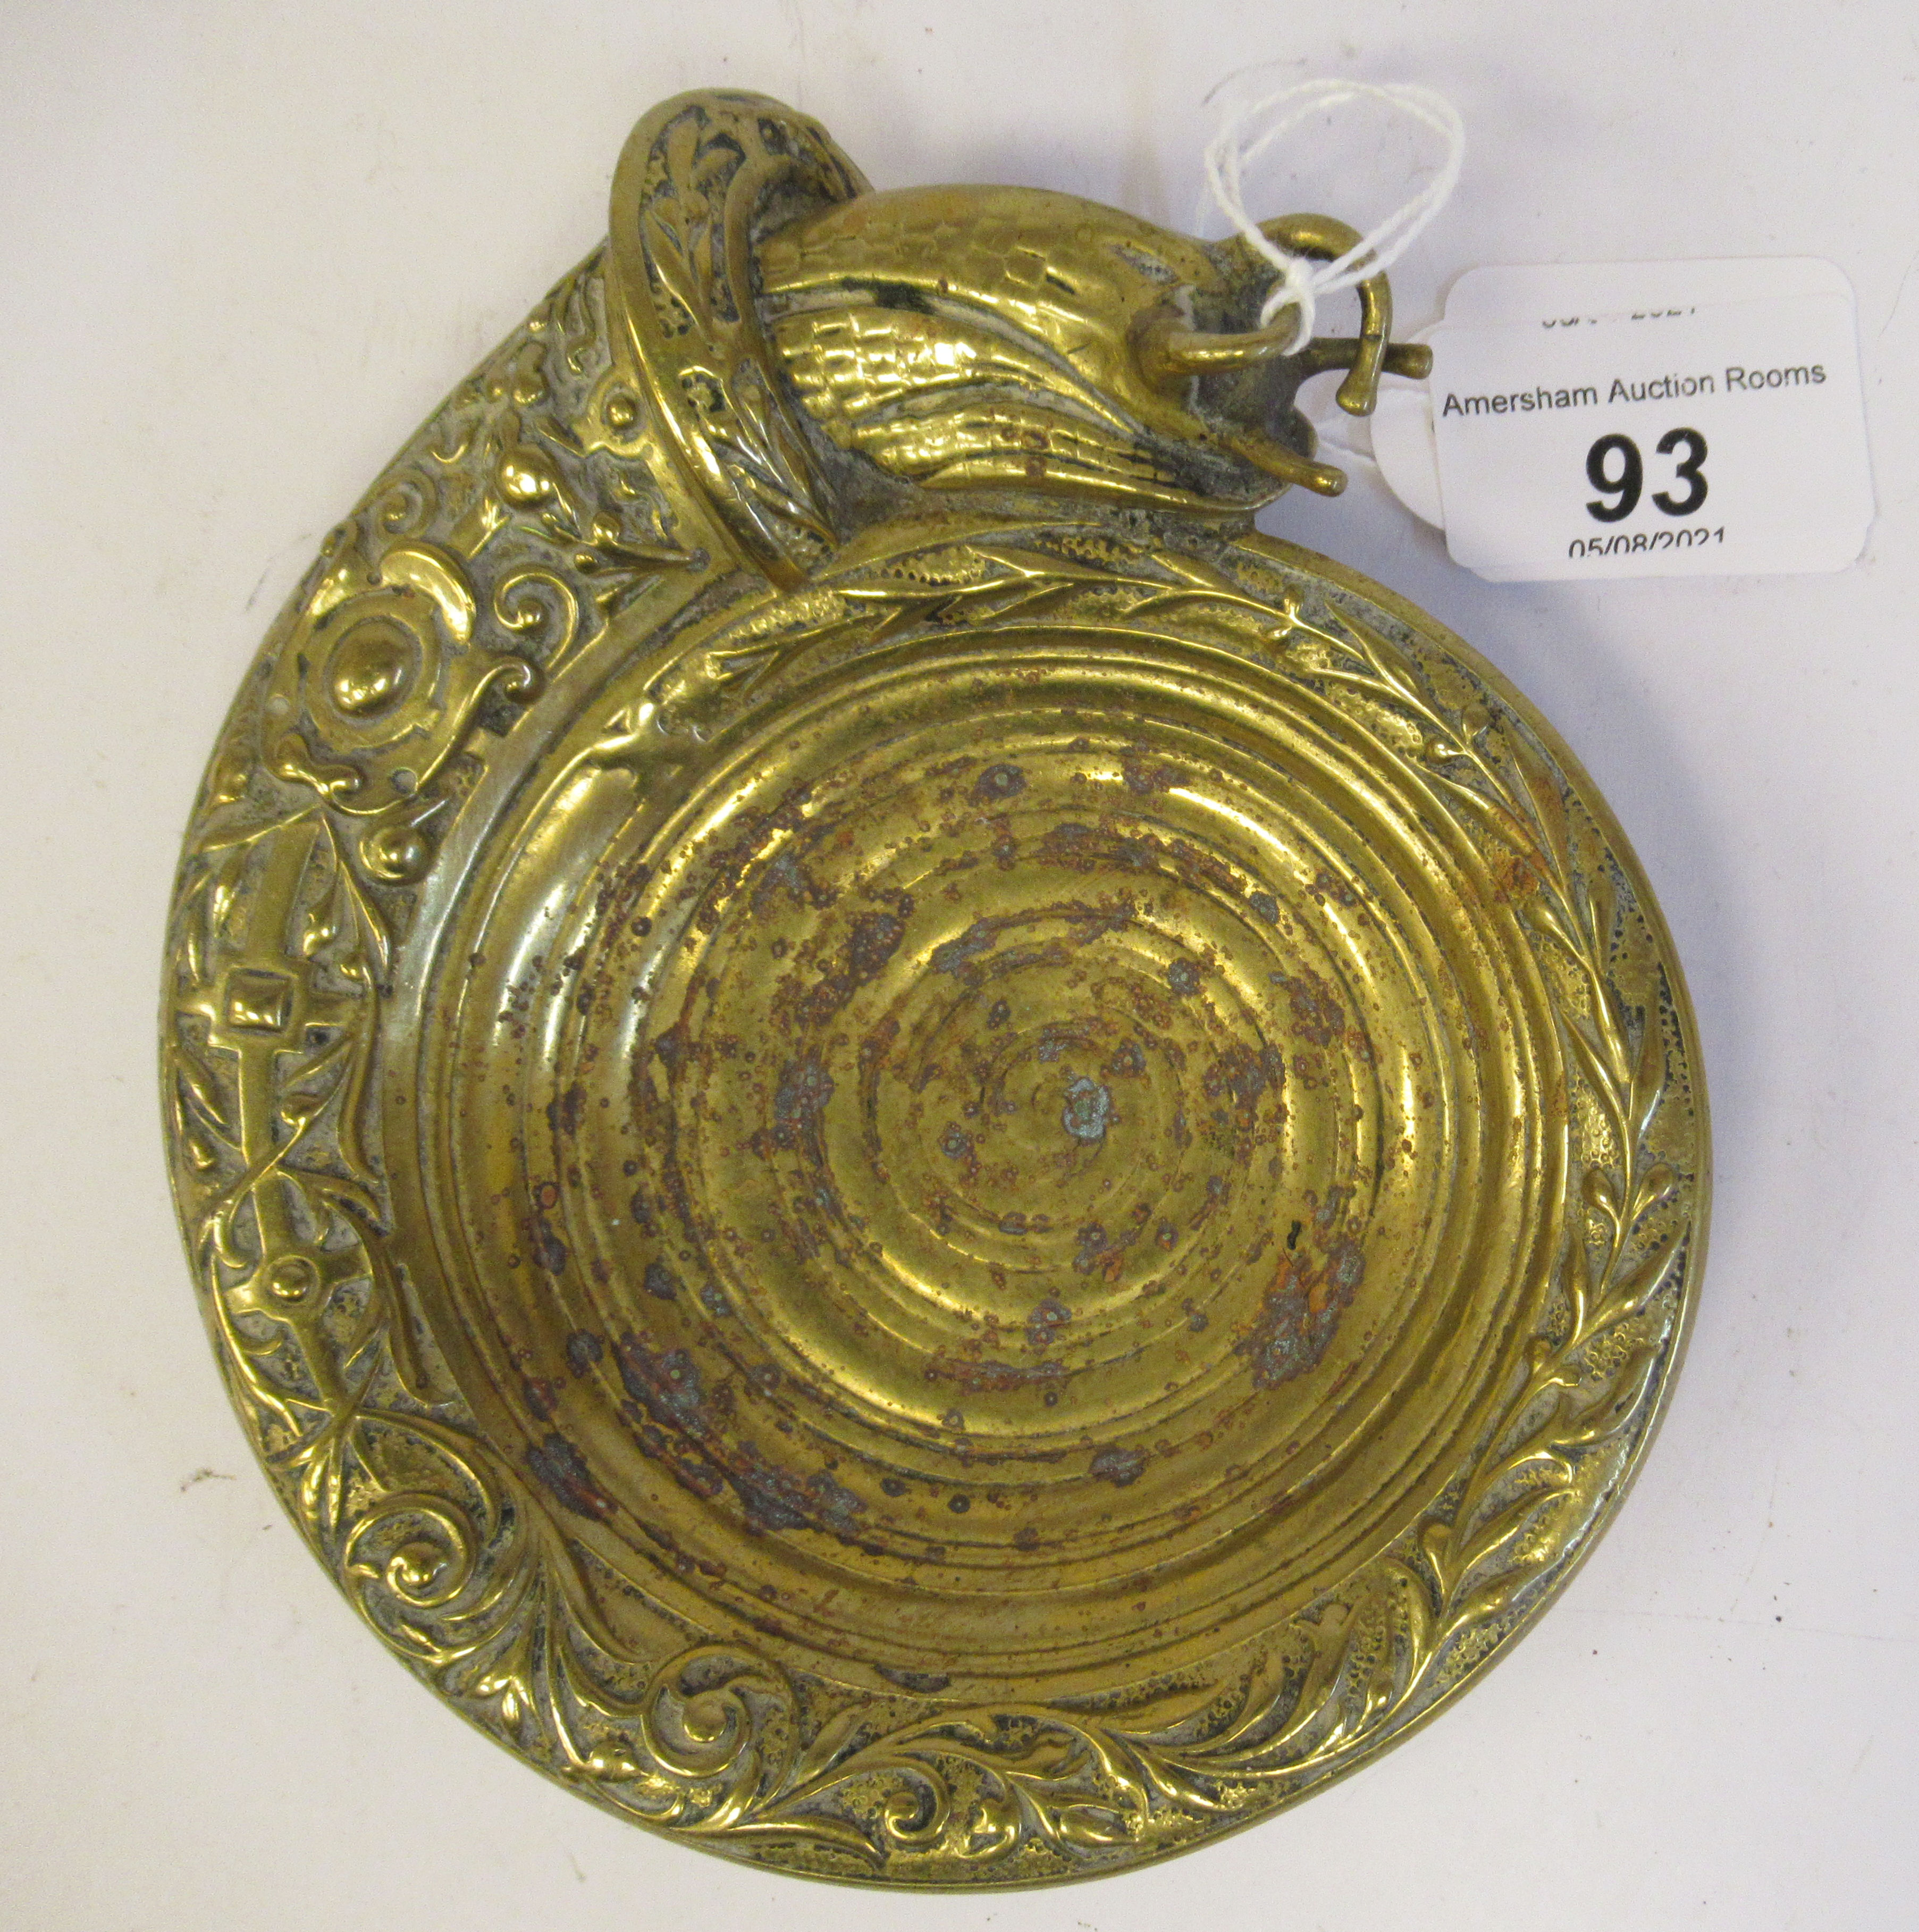 A late 19thC decoratively cast gilt metal dish, the border featuring a snail emerging from a